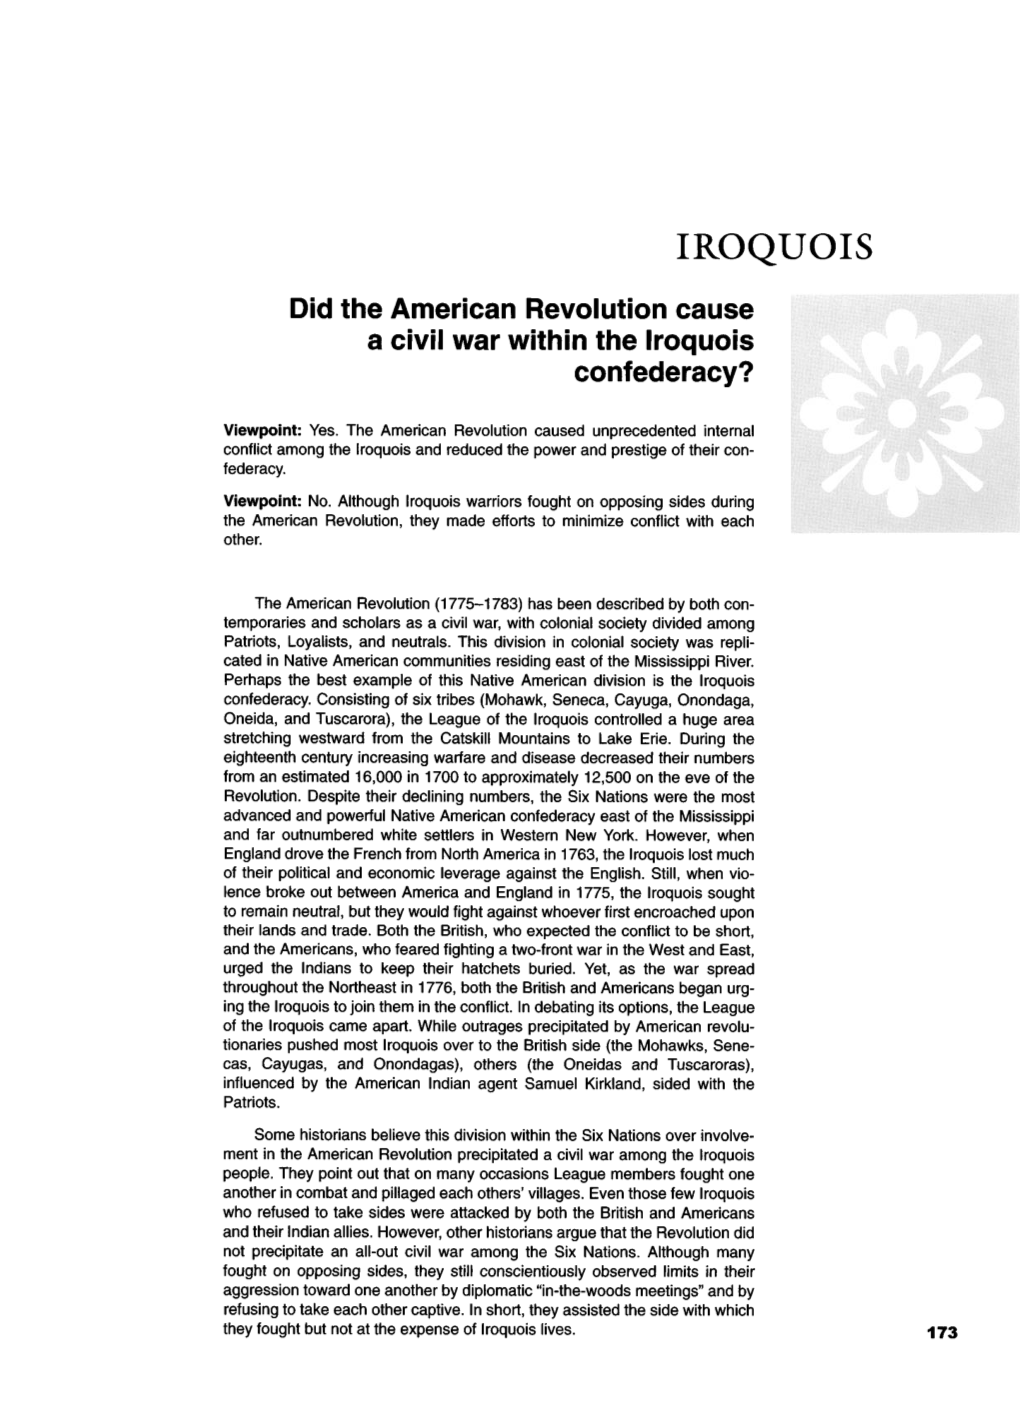 Did the American Revolution Cause a Civil War Within the Iroquois Confederacy?